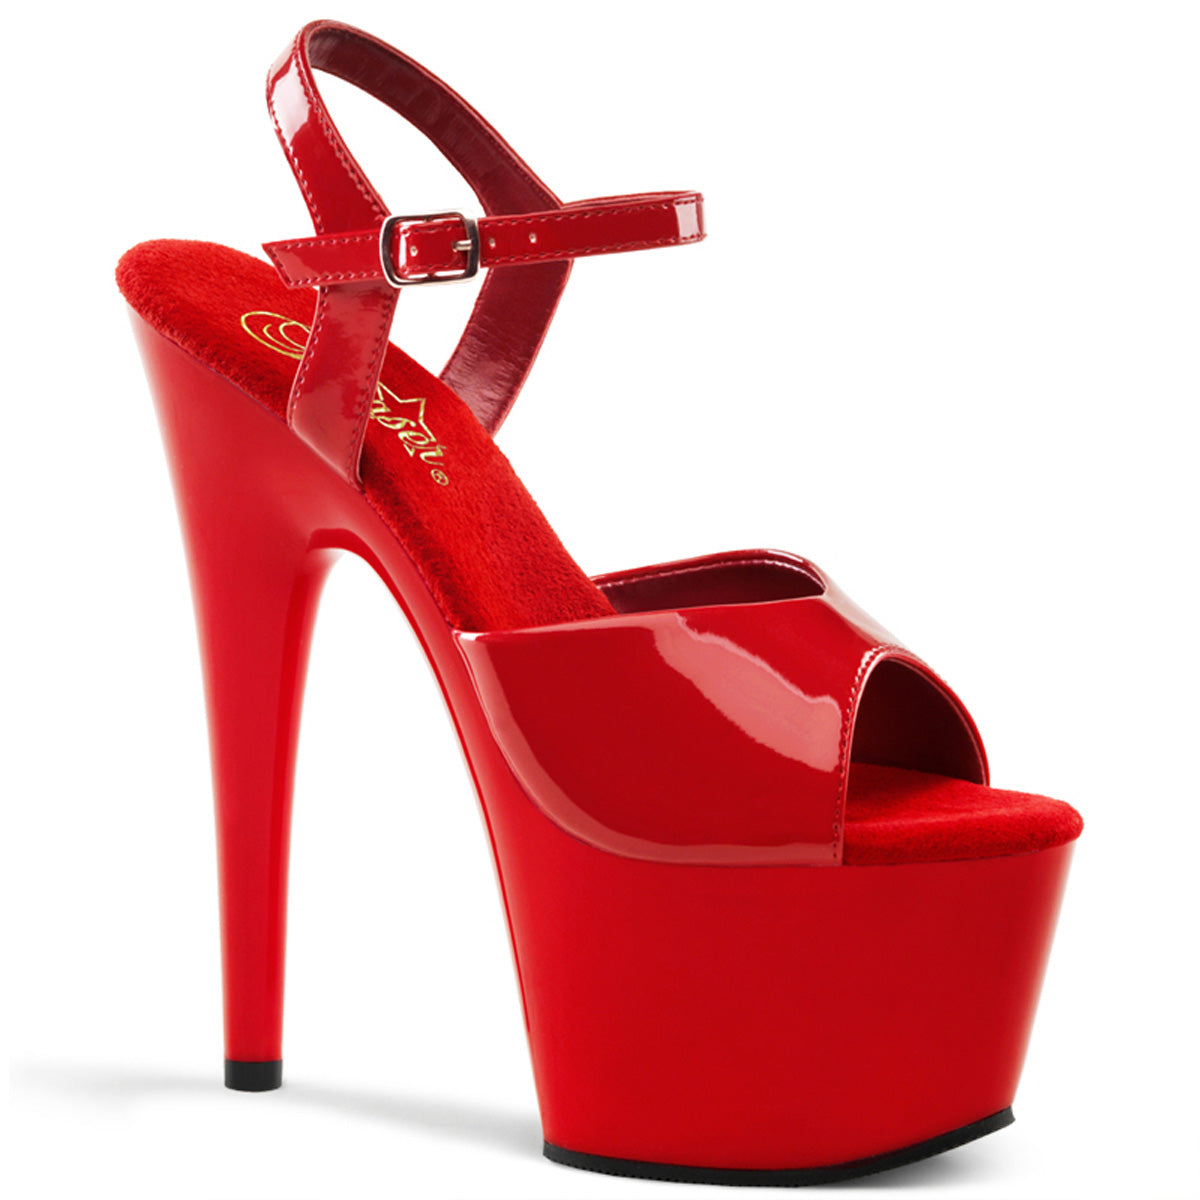 PLEASER ADORE-709 RED 7 INCH HIGH HEEL PLATFORM SHOES SIZE 10